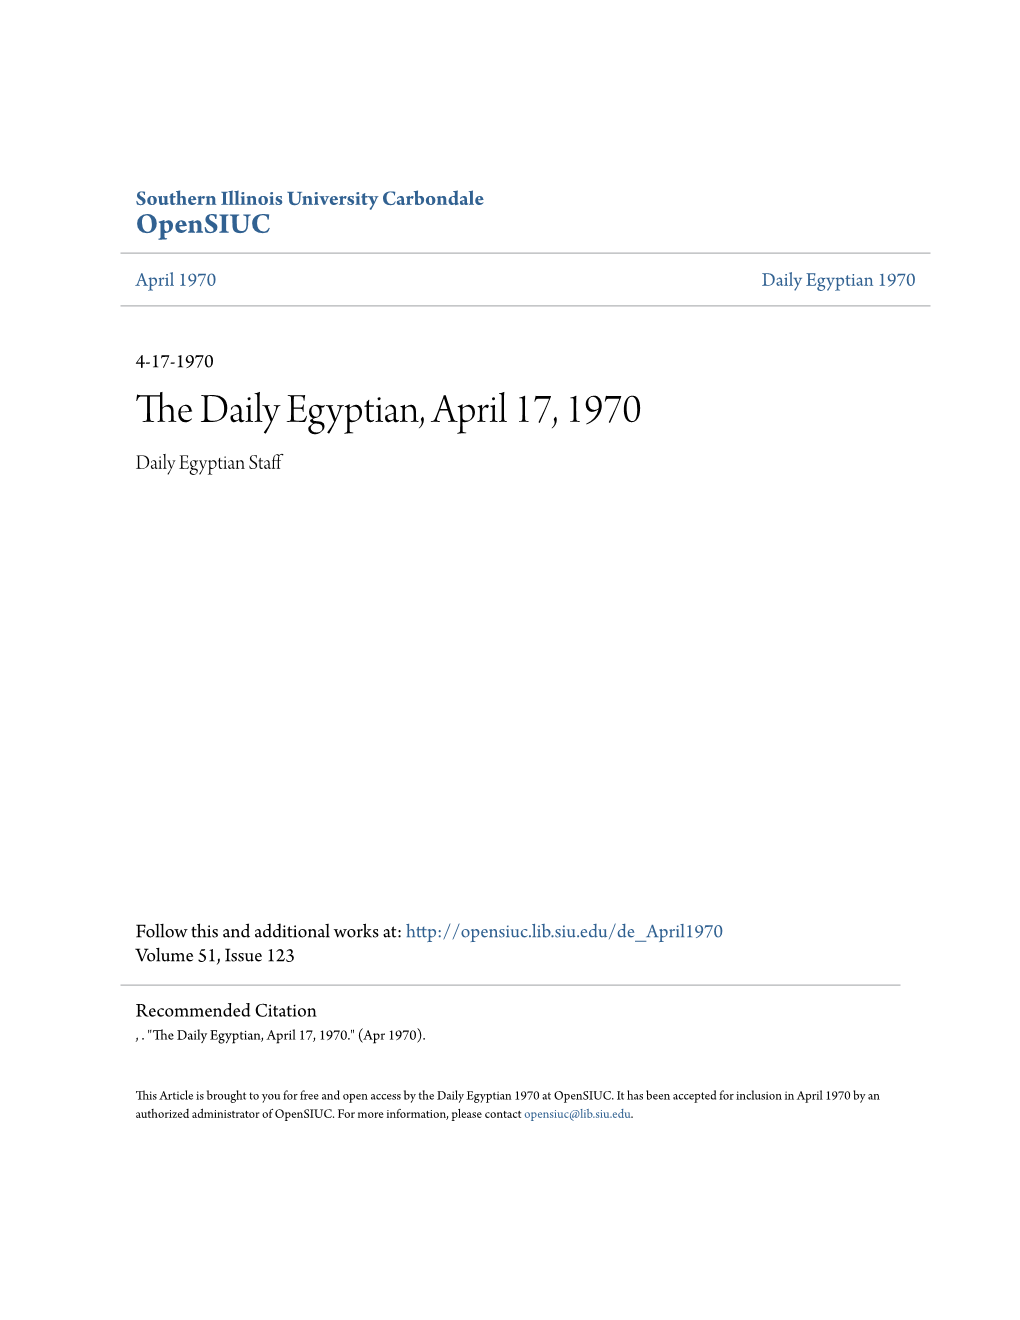 The Daily Egyptian, April 17, 1970